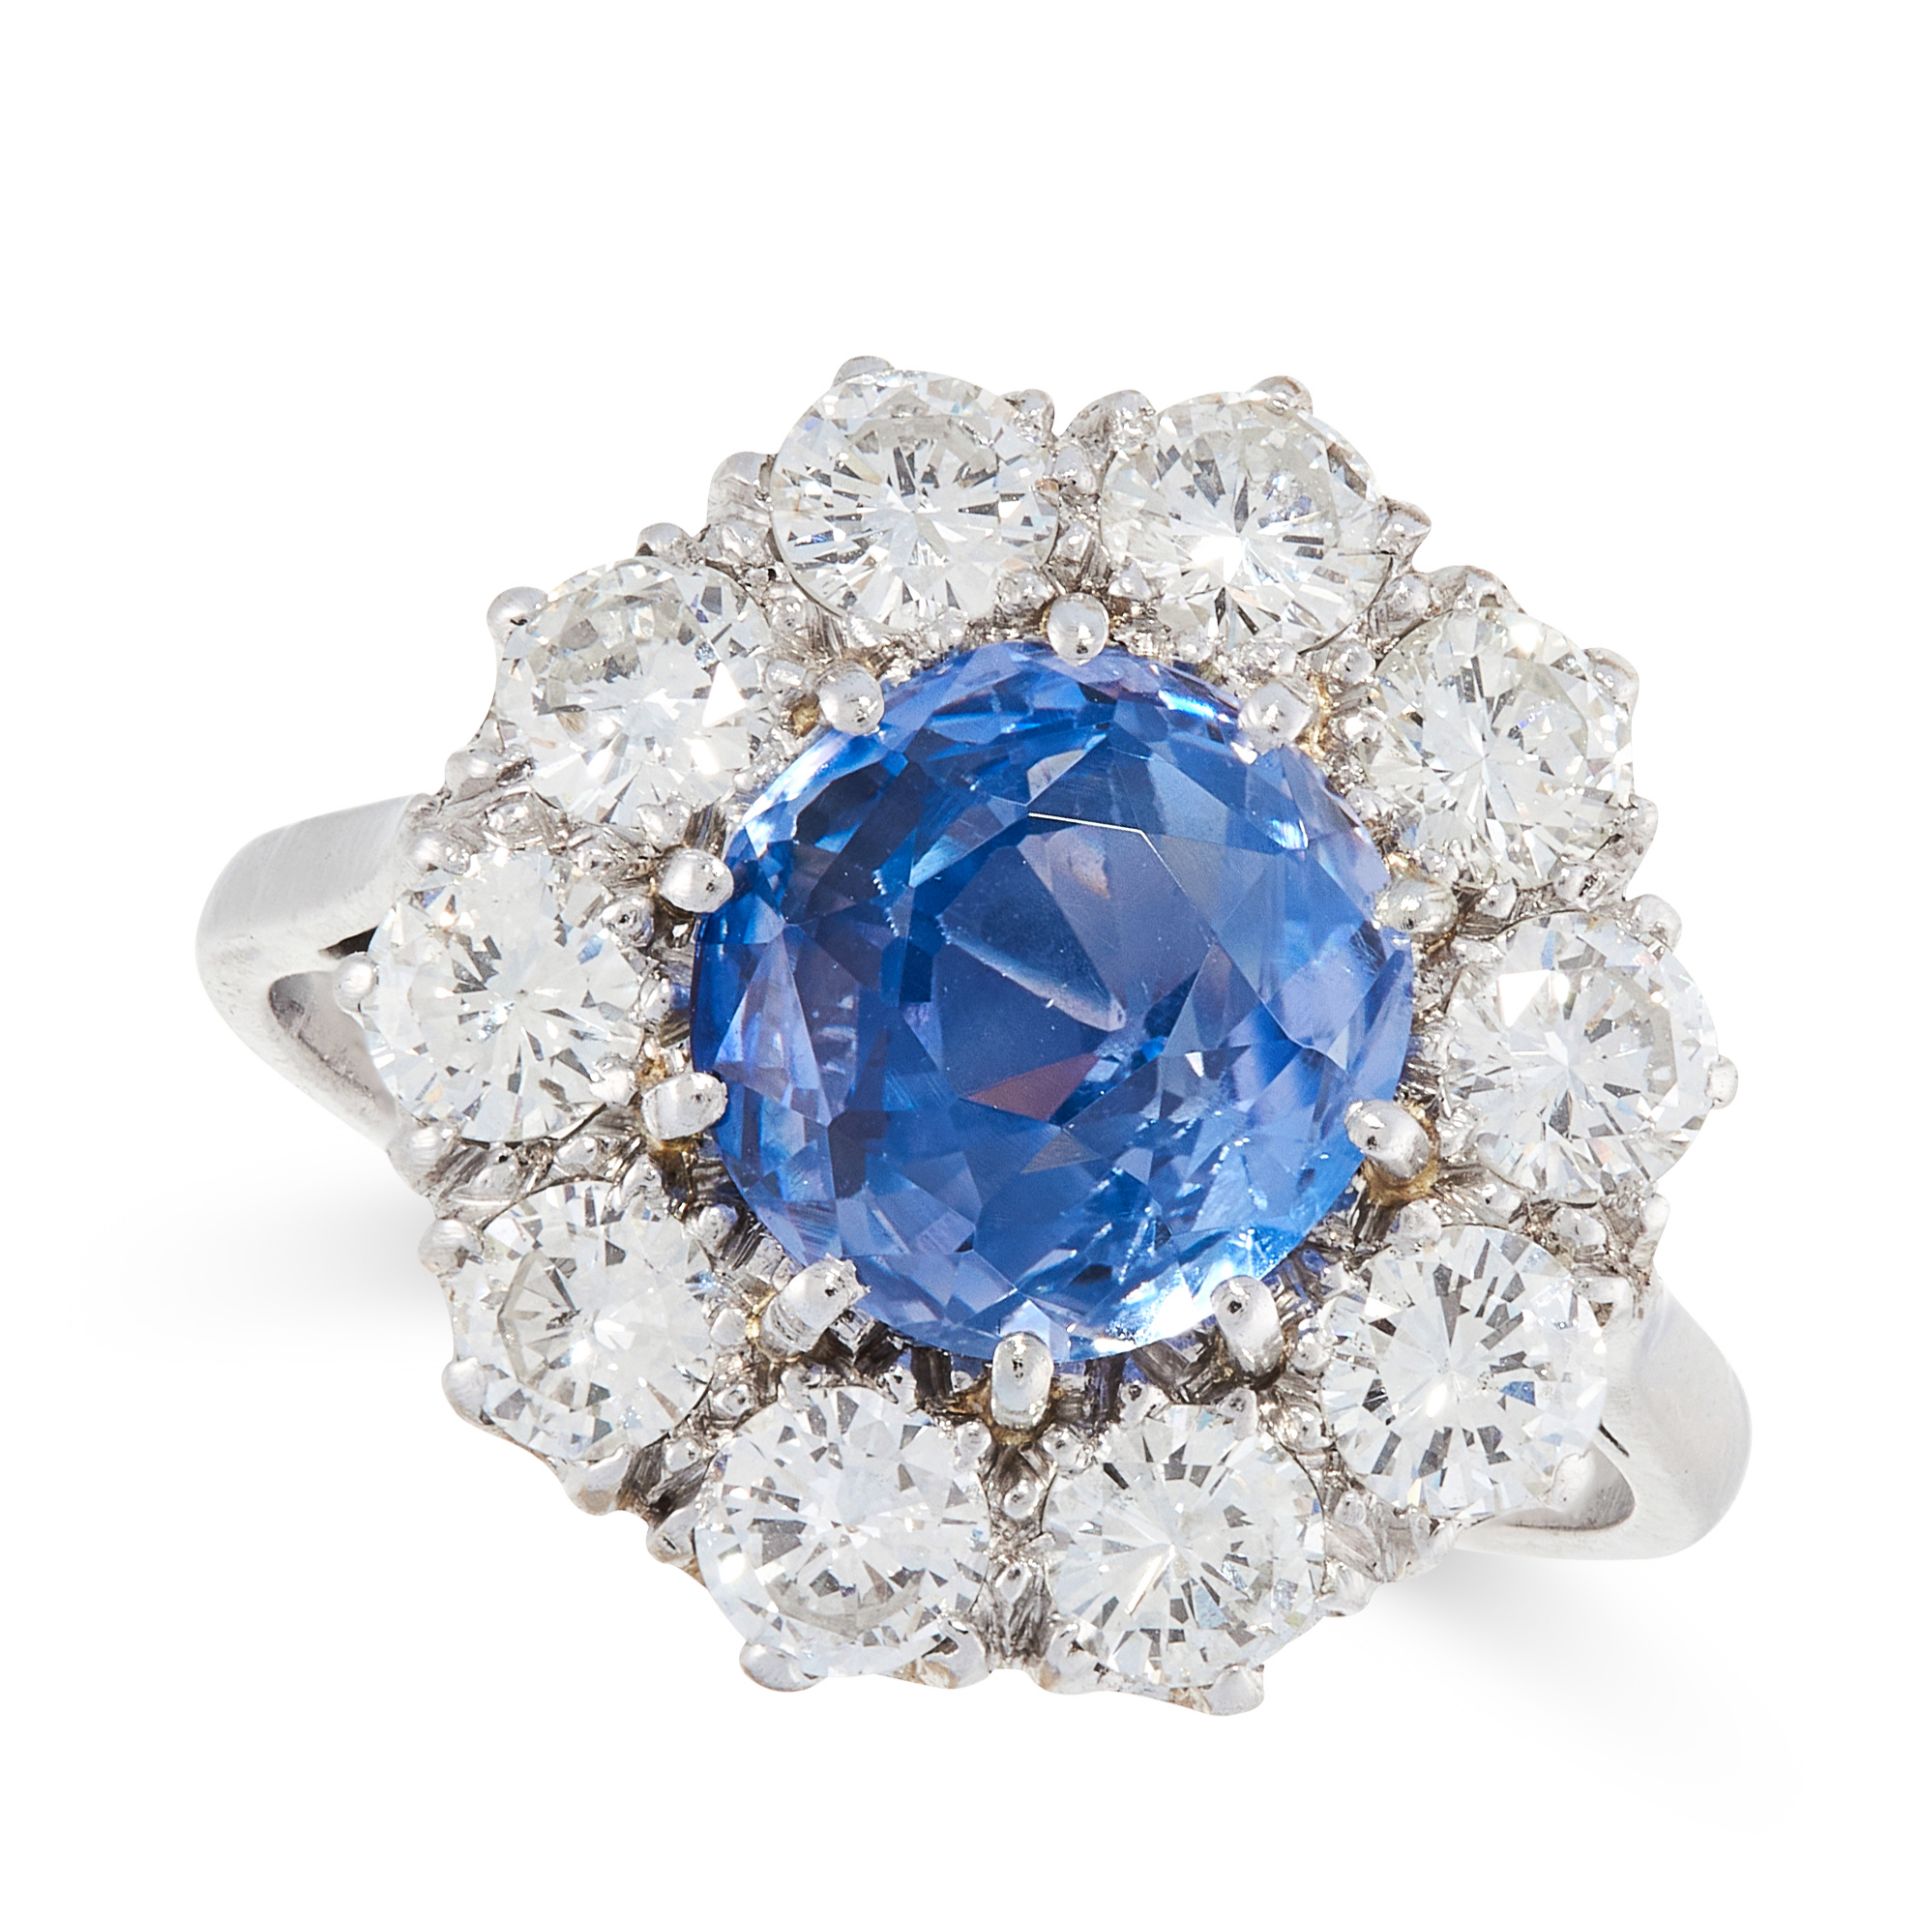 A CEYLON NO HEAT SAPPHIRE AND DIAMOND RING in platinum and 18ct white gold, set with a cushion cut